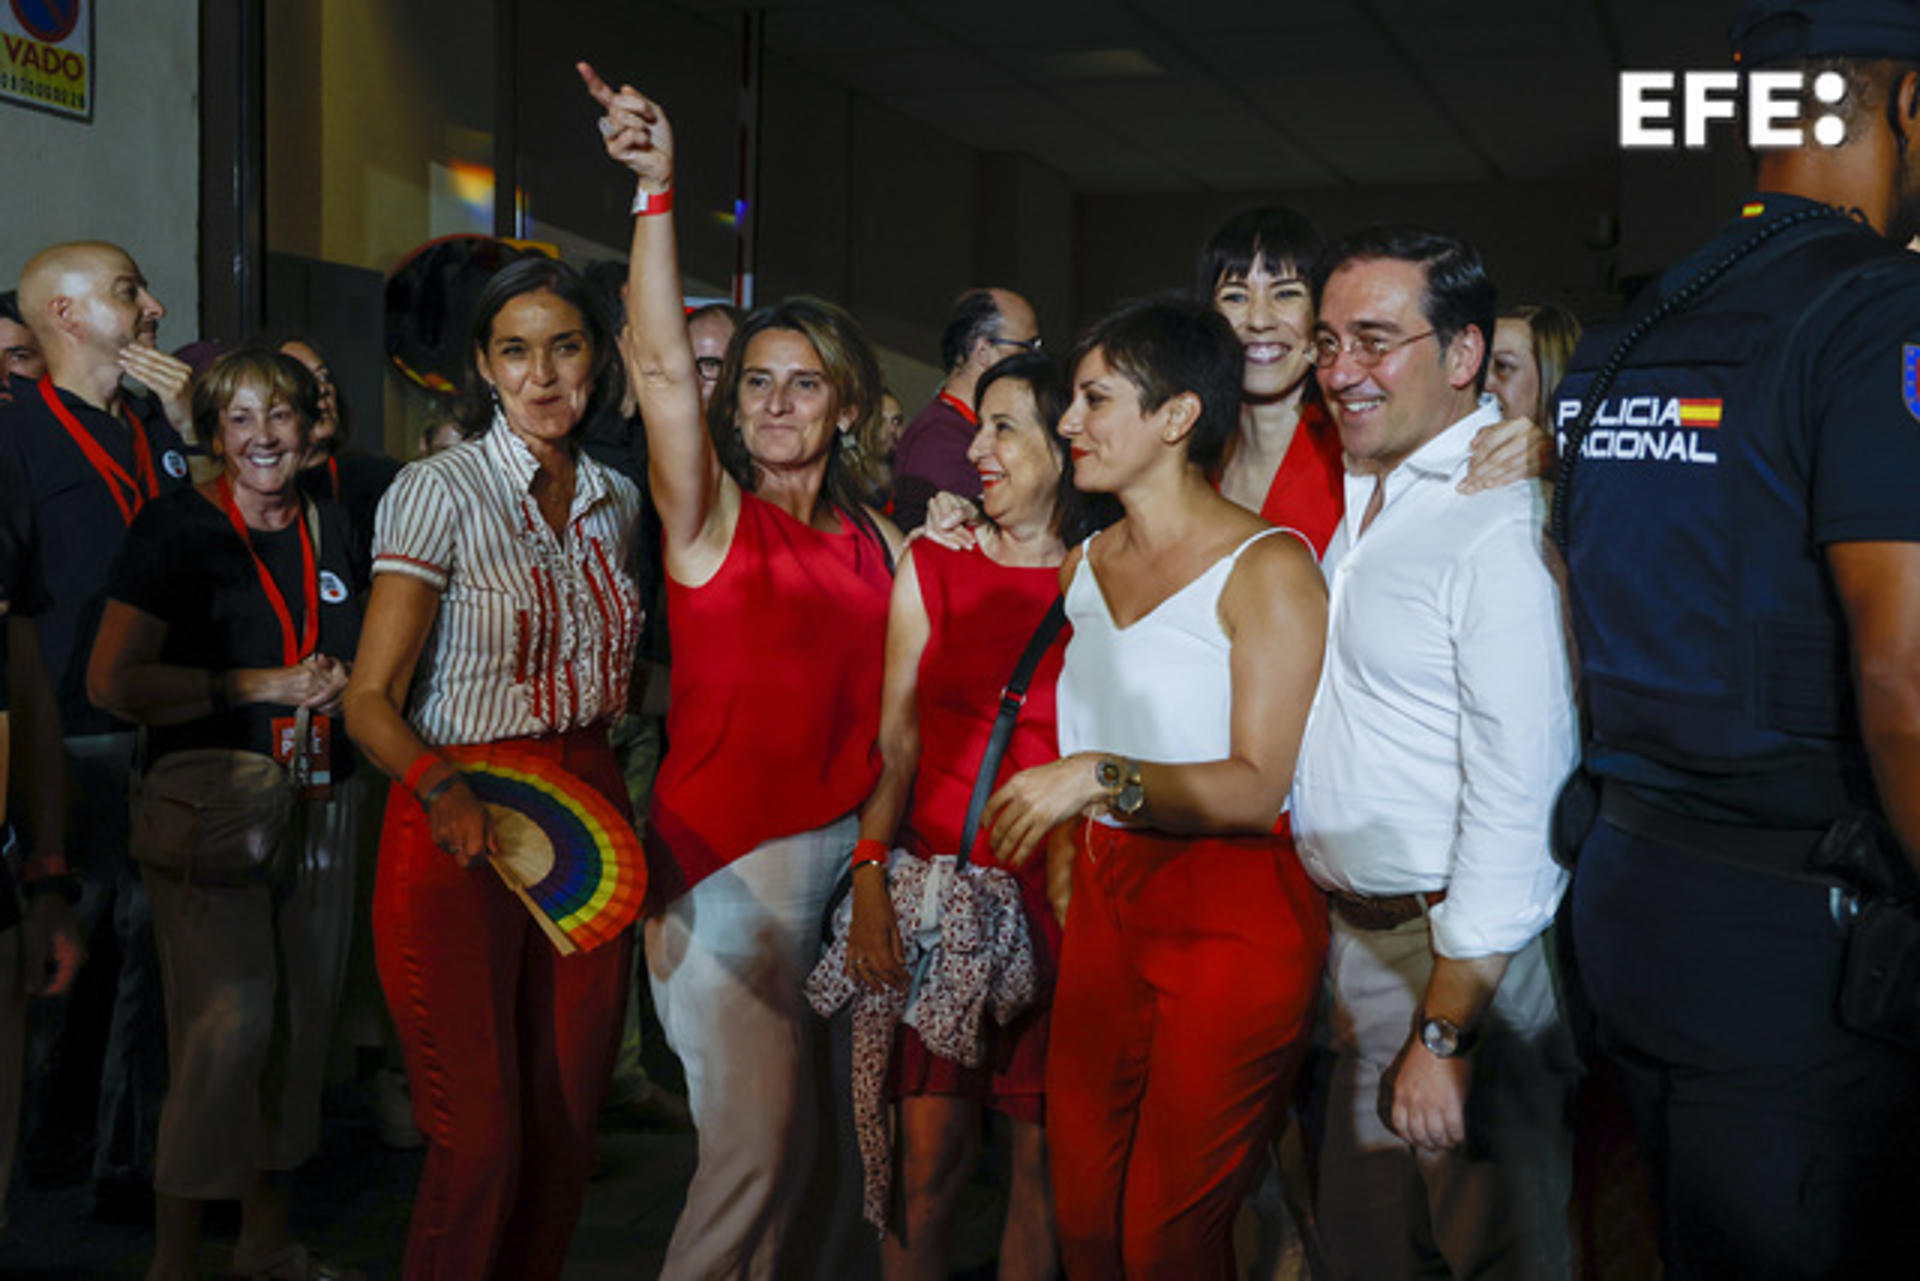 From left to right: Socialist leaders Reyes Maroto, Teresa Ribera, Margarita Robles, Isabel Rodriguez, and Jose Manuel Albares at party headquarters in Madrid on 23 July 2023 awaiting the results of Spain's general elections. EFE/Javier Lizon
